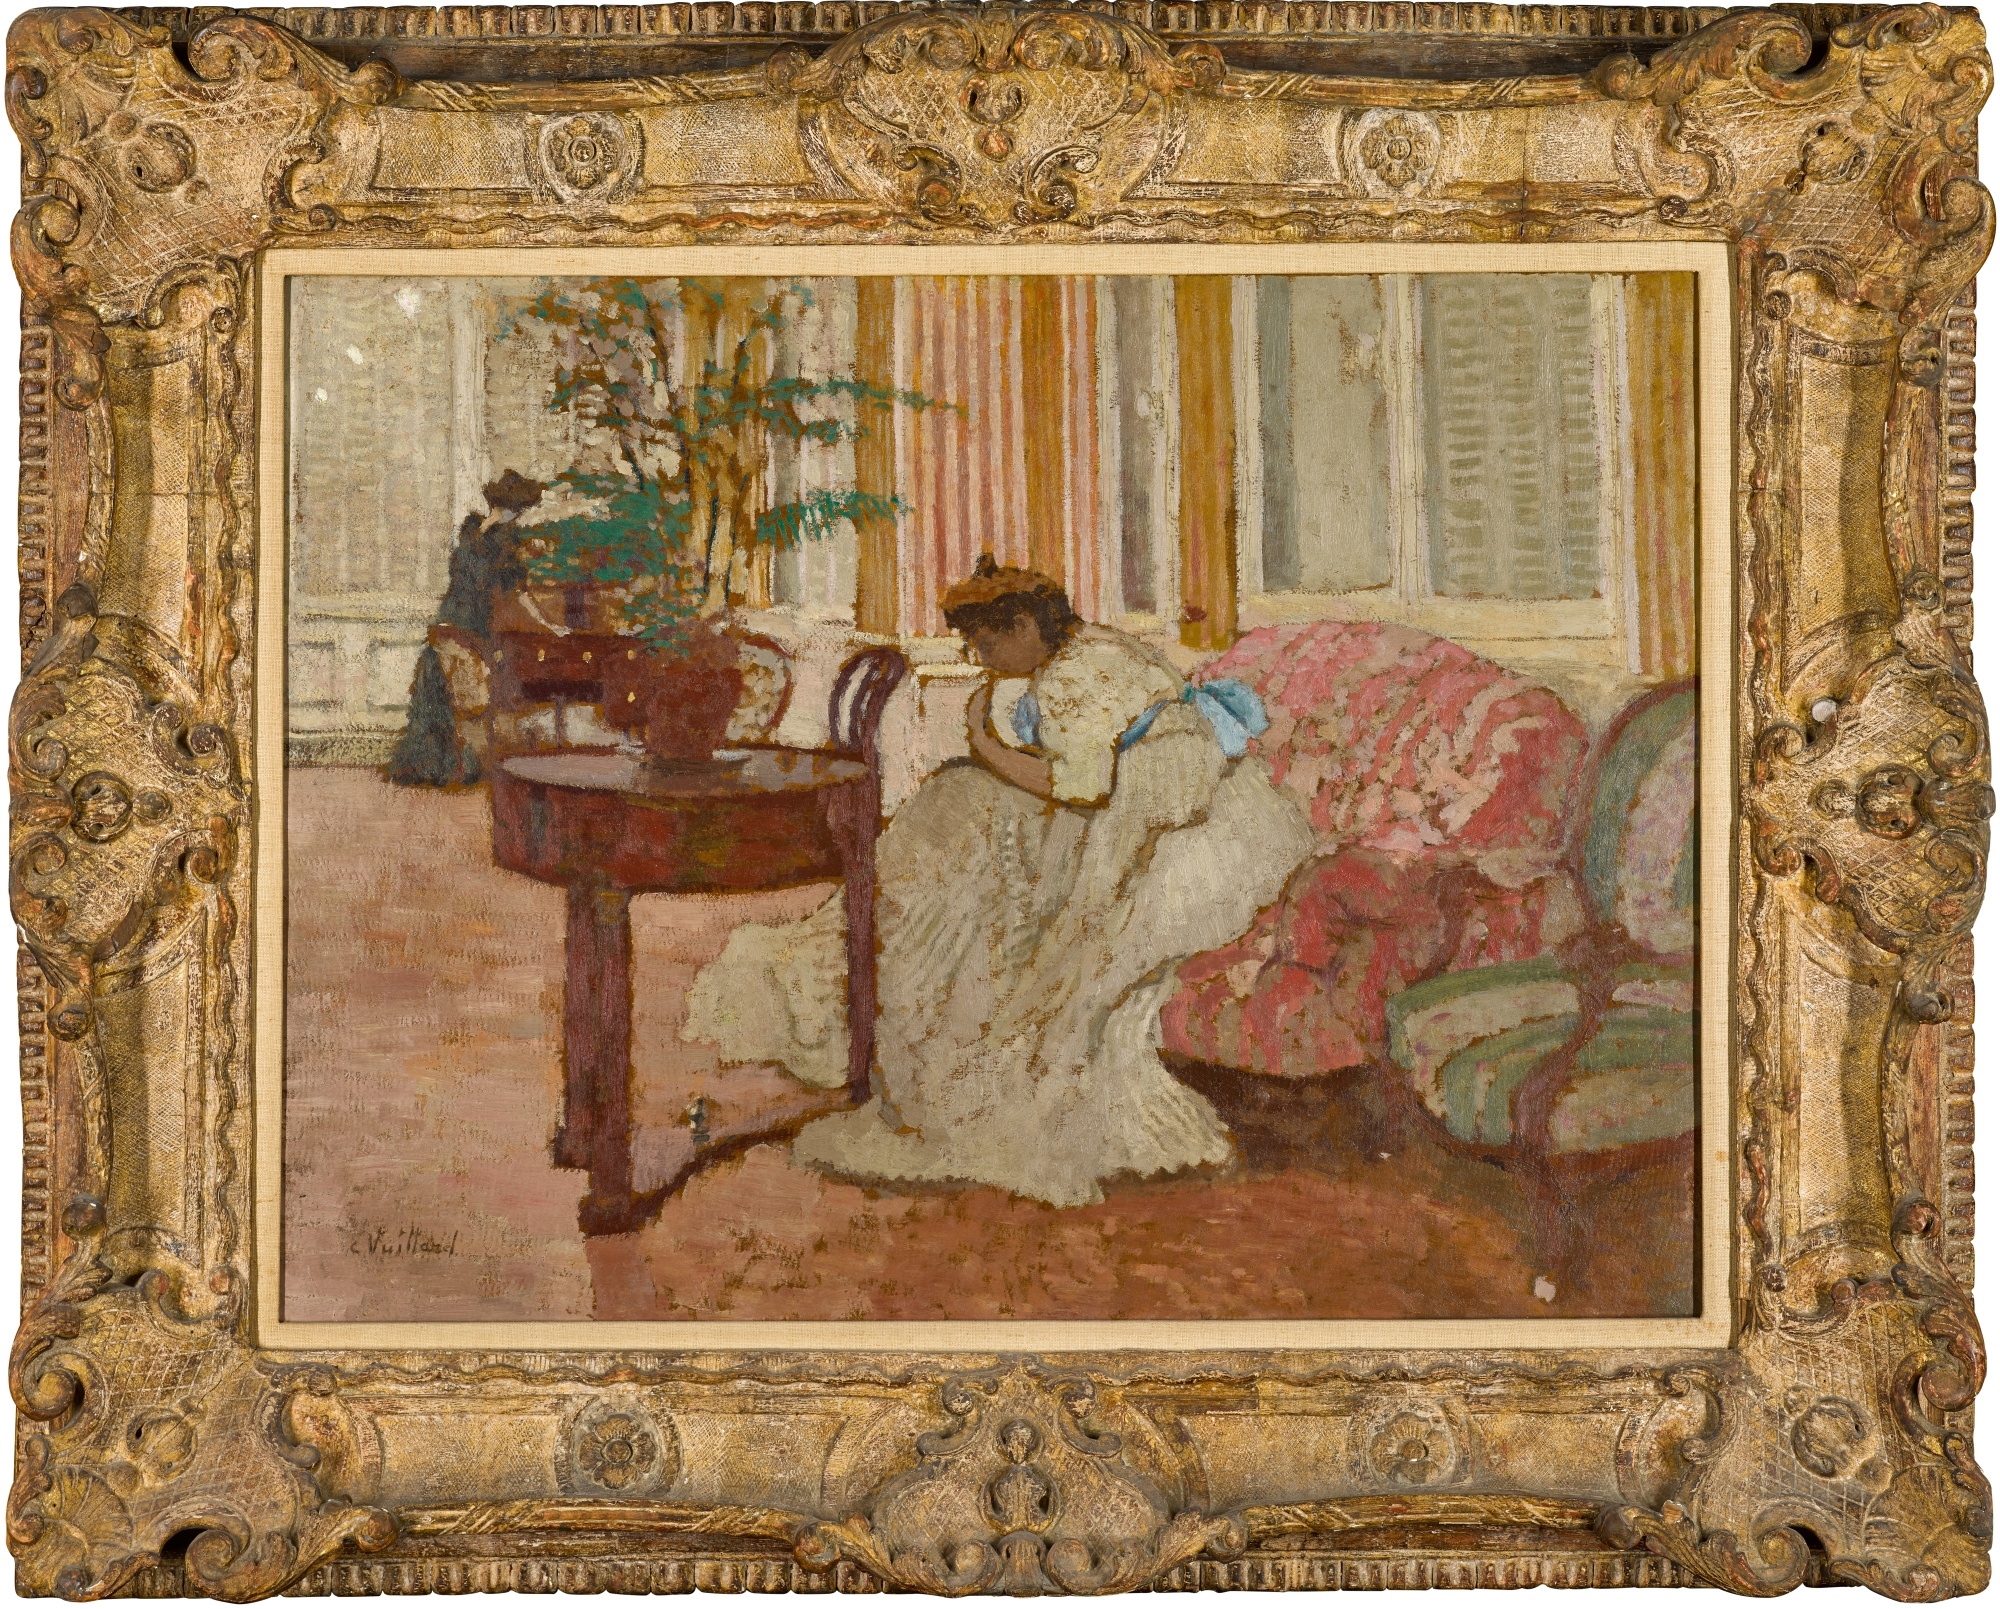 Artwork by Édouard Vuillard, La couseuse, Made of oil on board laid down on cradled panel